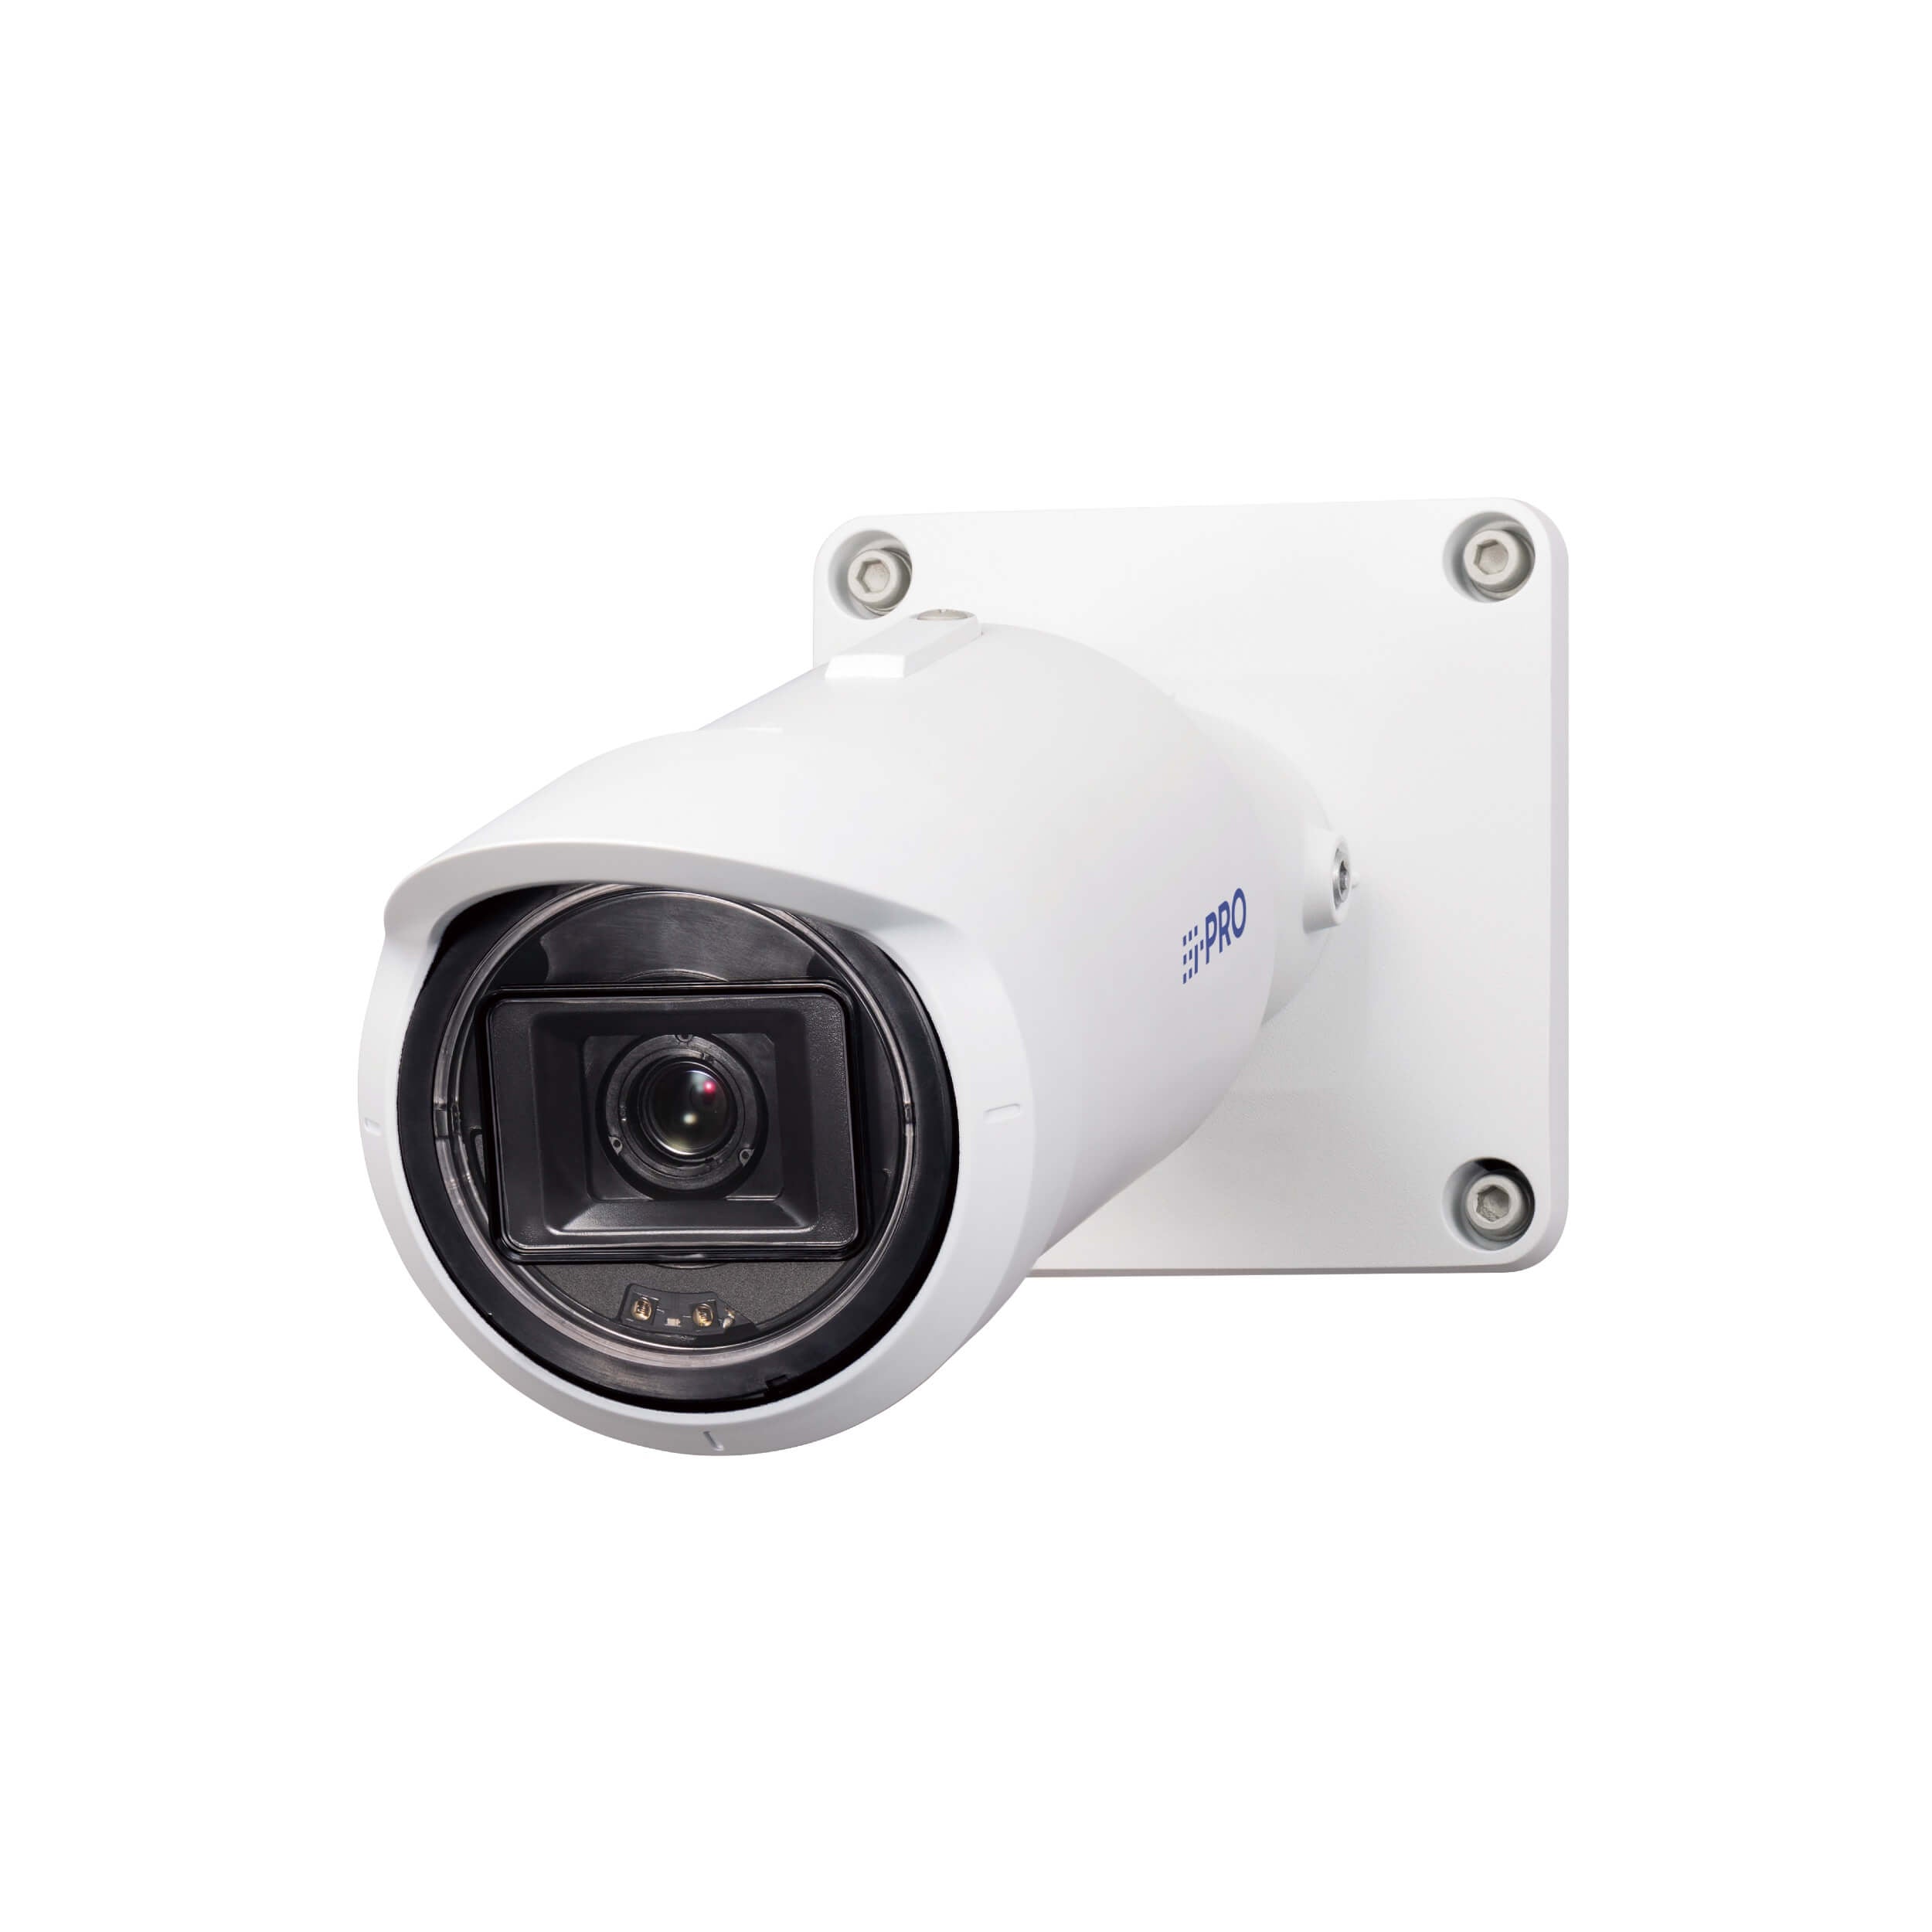 Panasonic WV-S15500-F6L 5MP Outdoor Bullet Network Camera with AI Engine with 6.1mm Lens